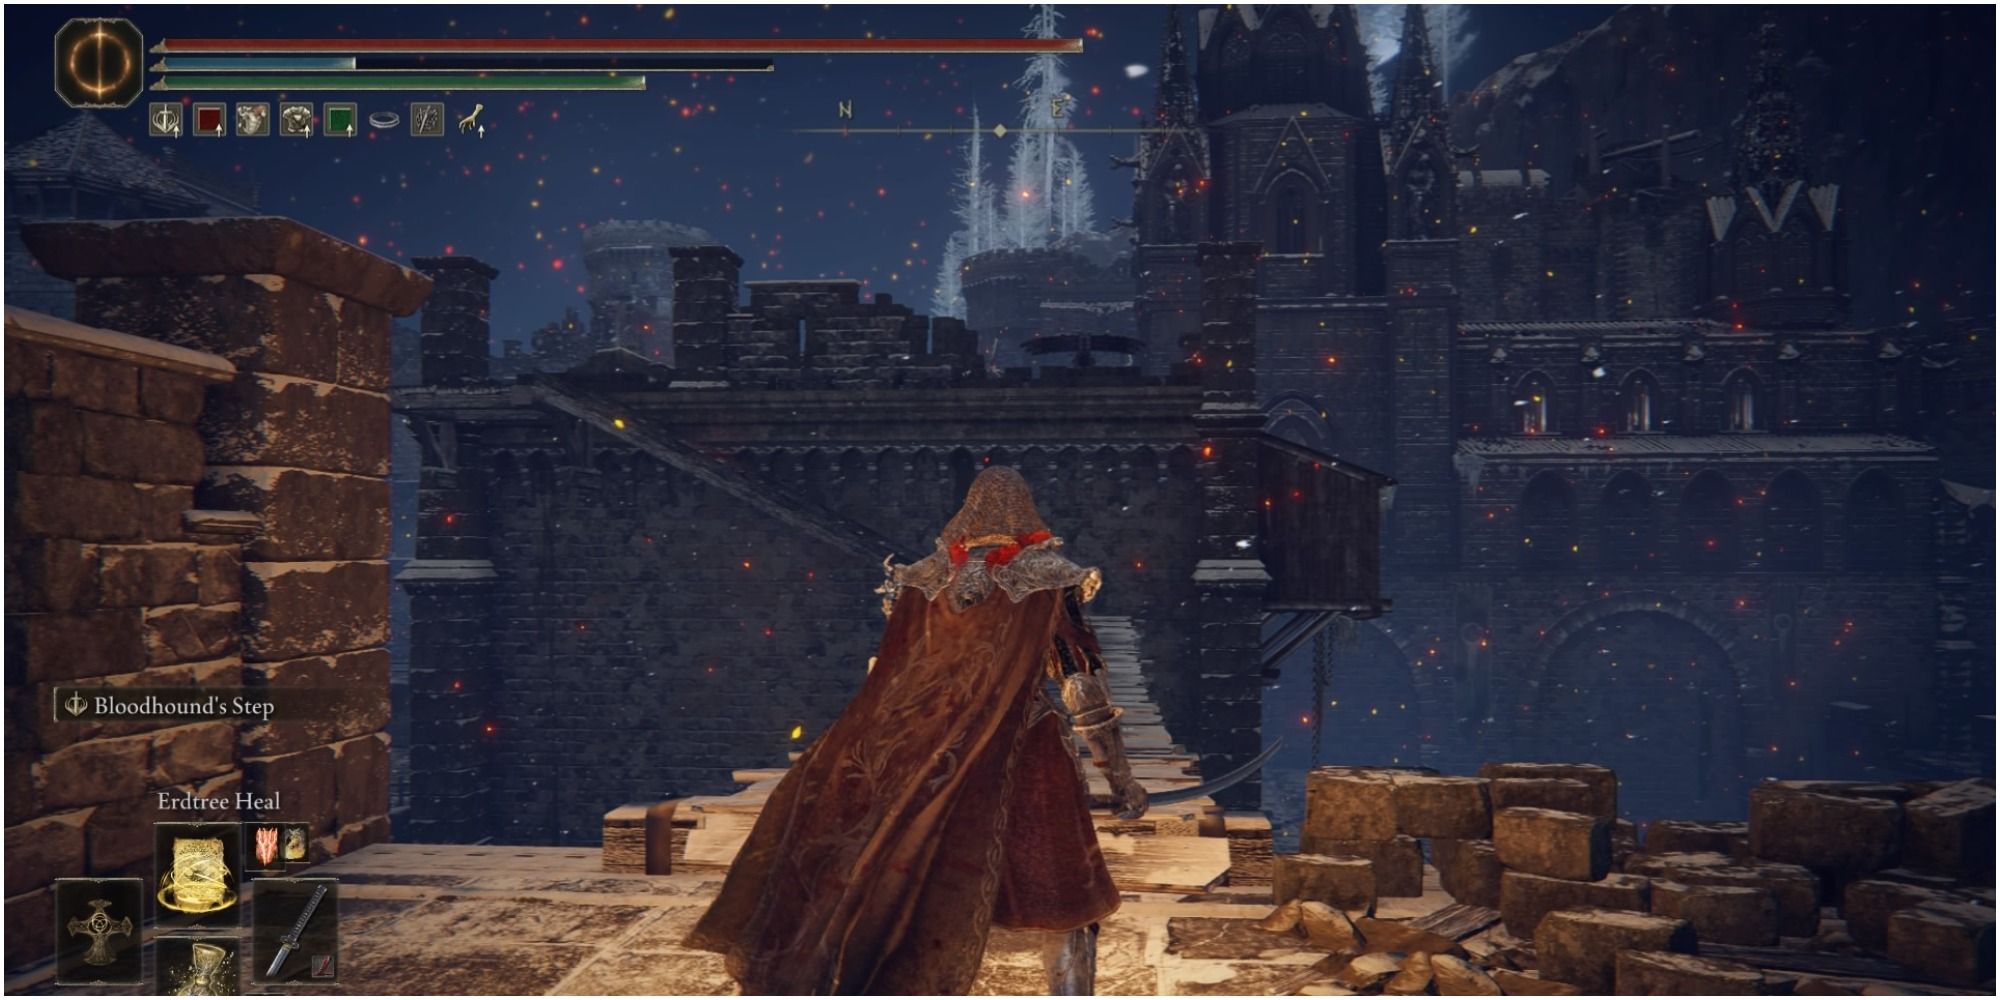 The player crossing the bridge to another part of the castle.